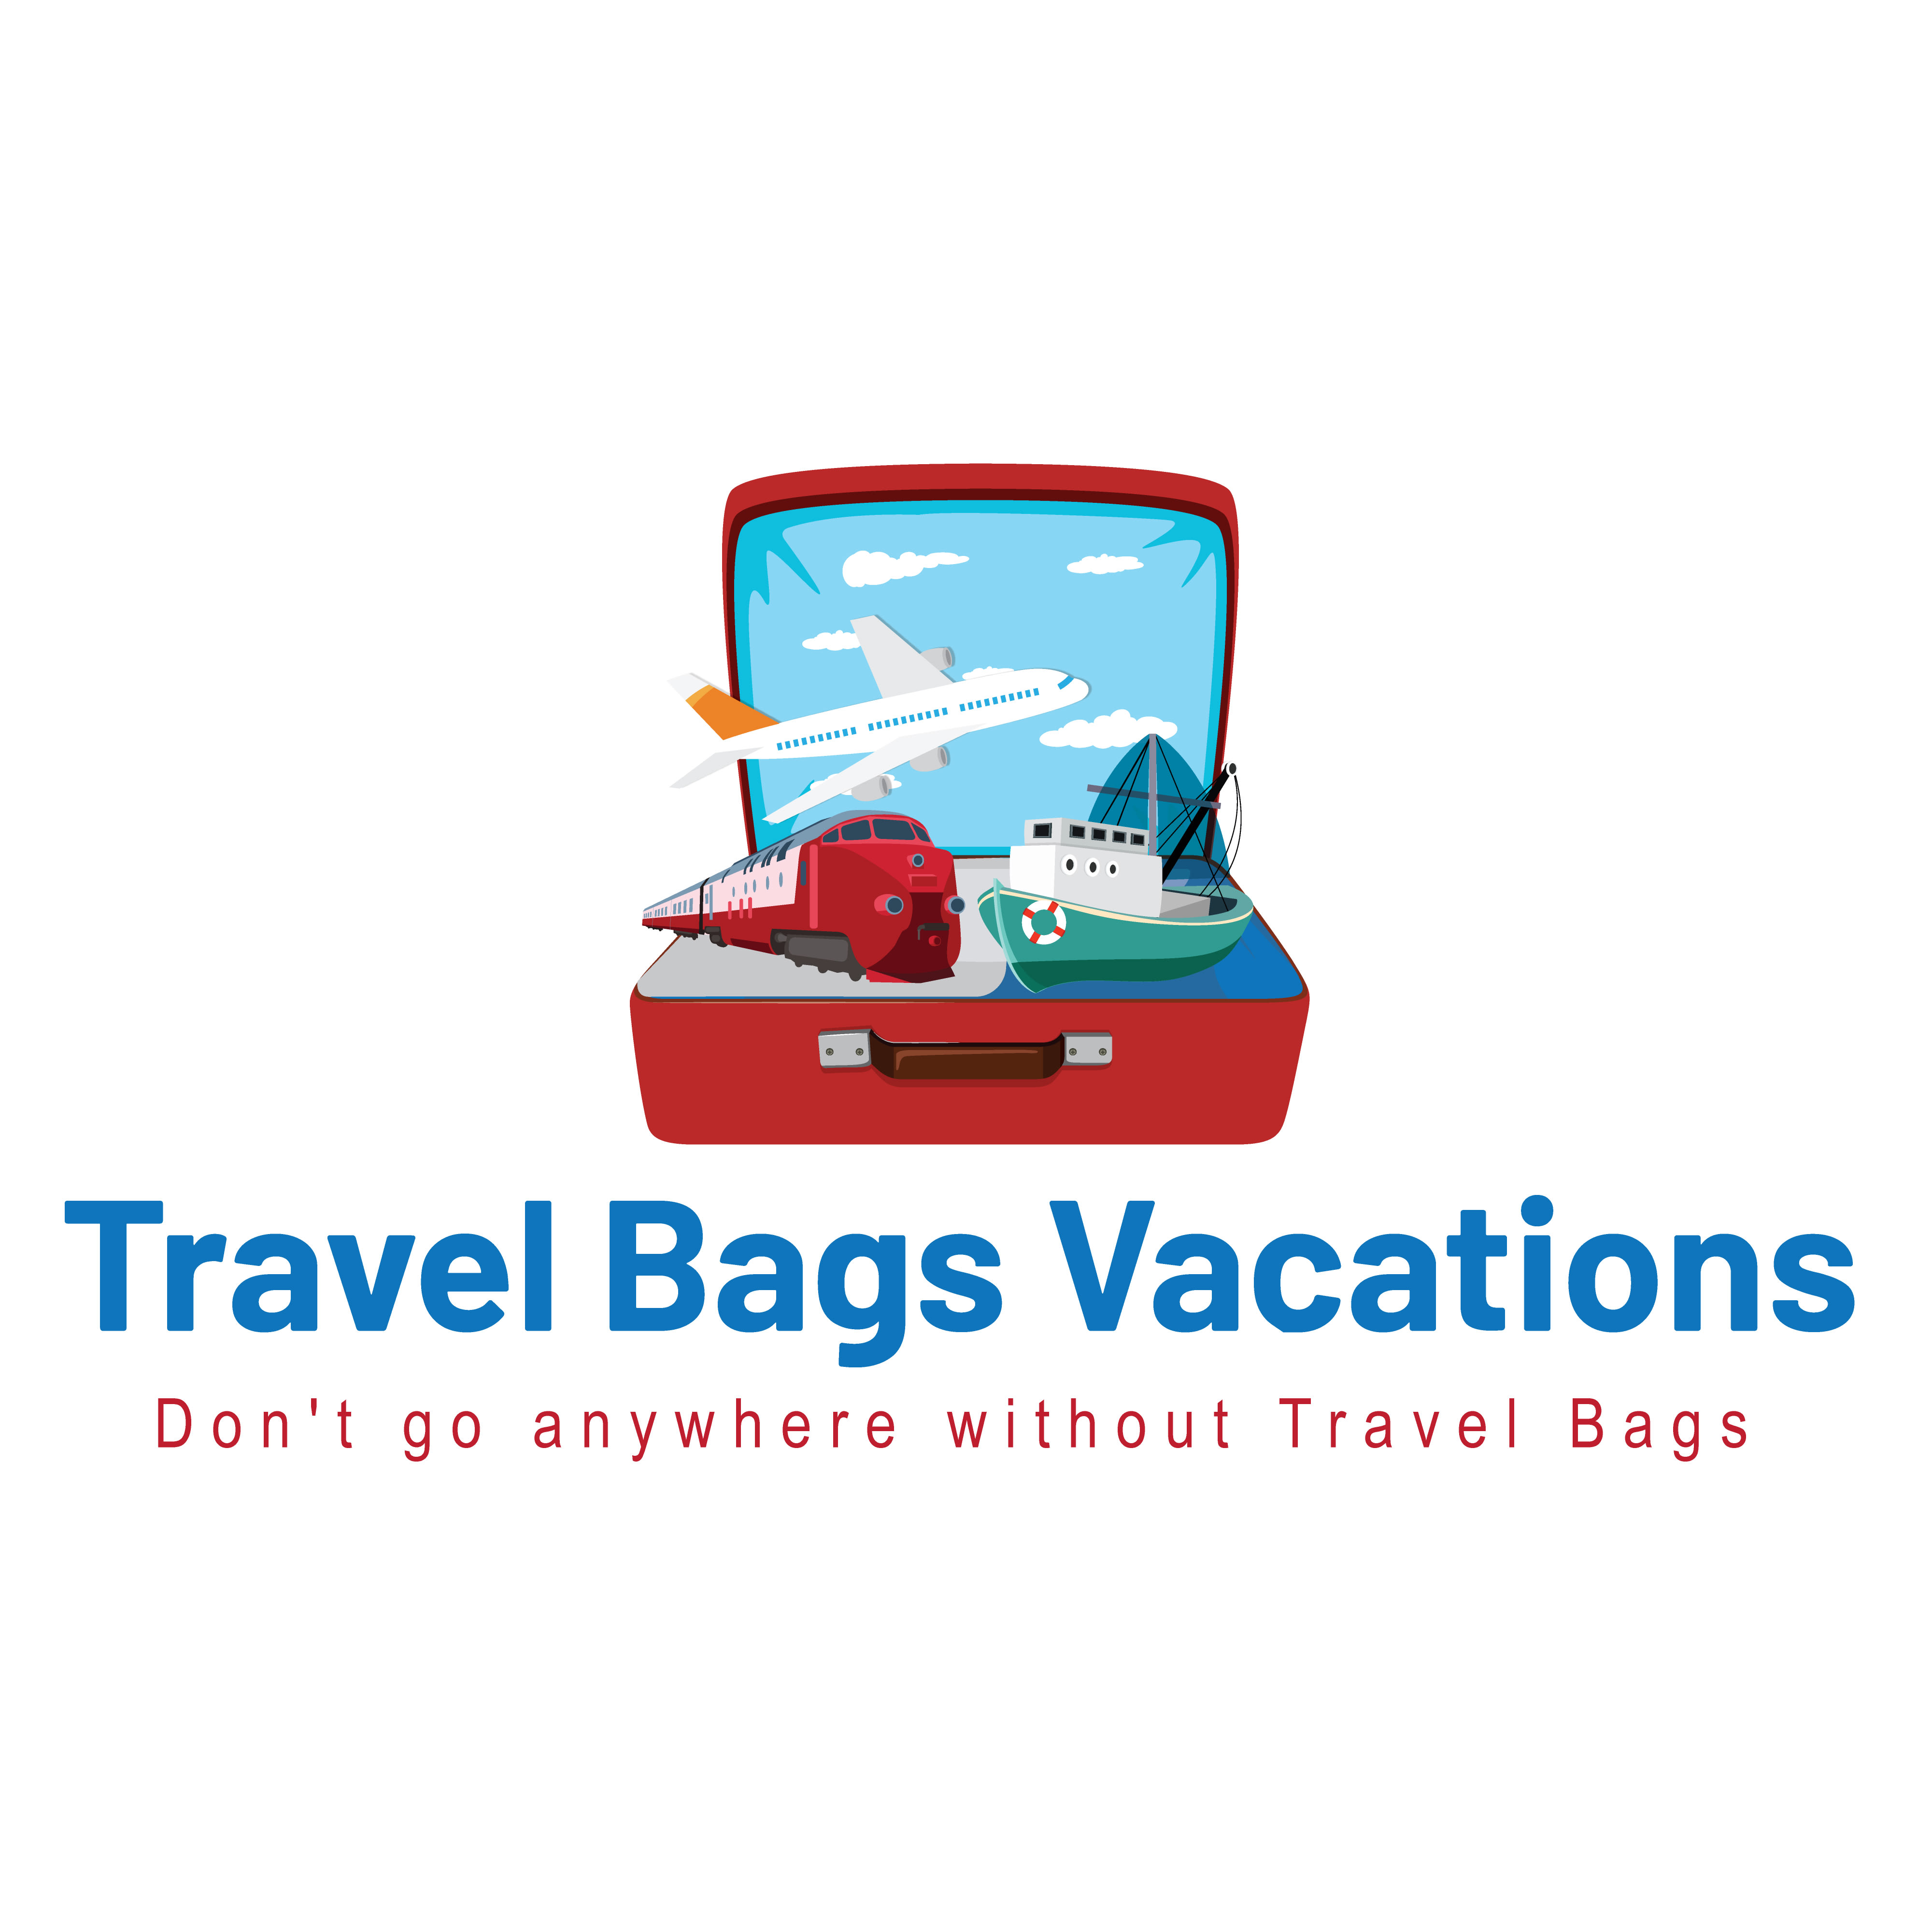 Travel Bags Vacations